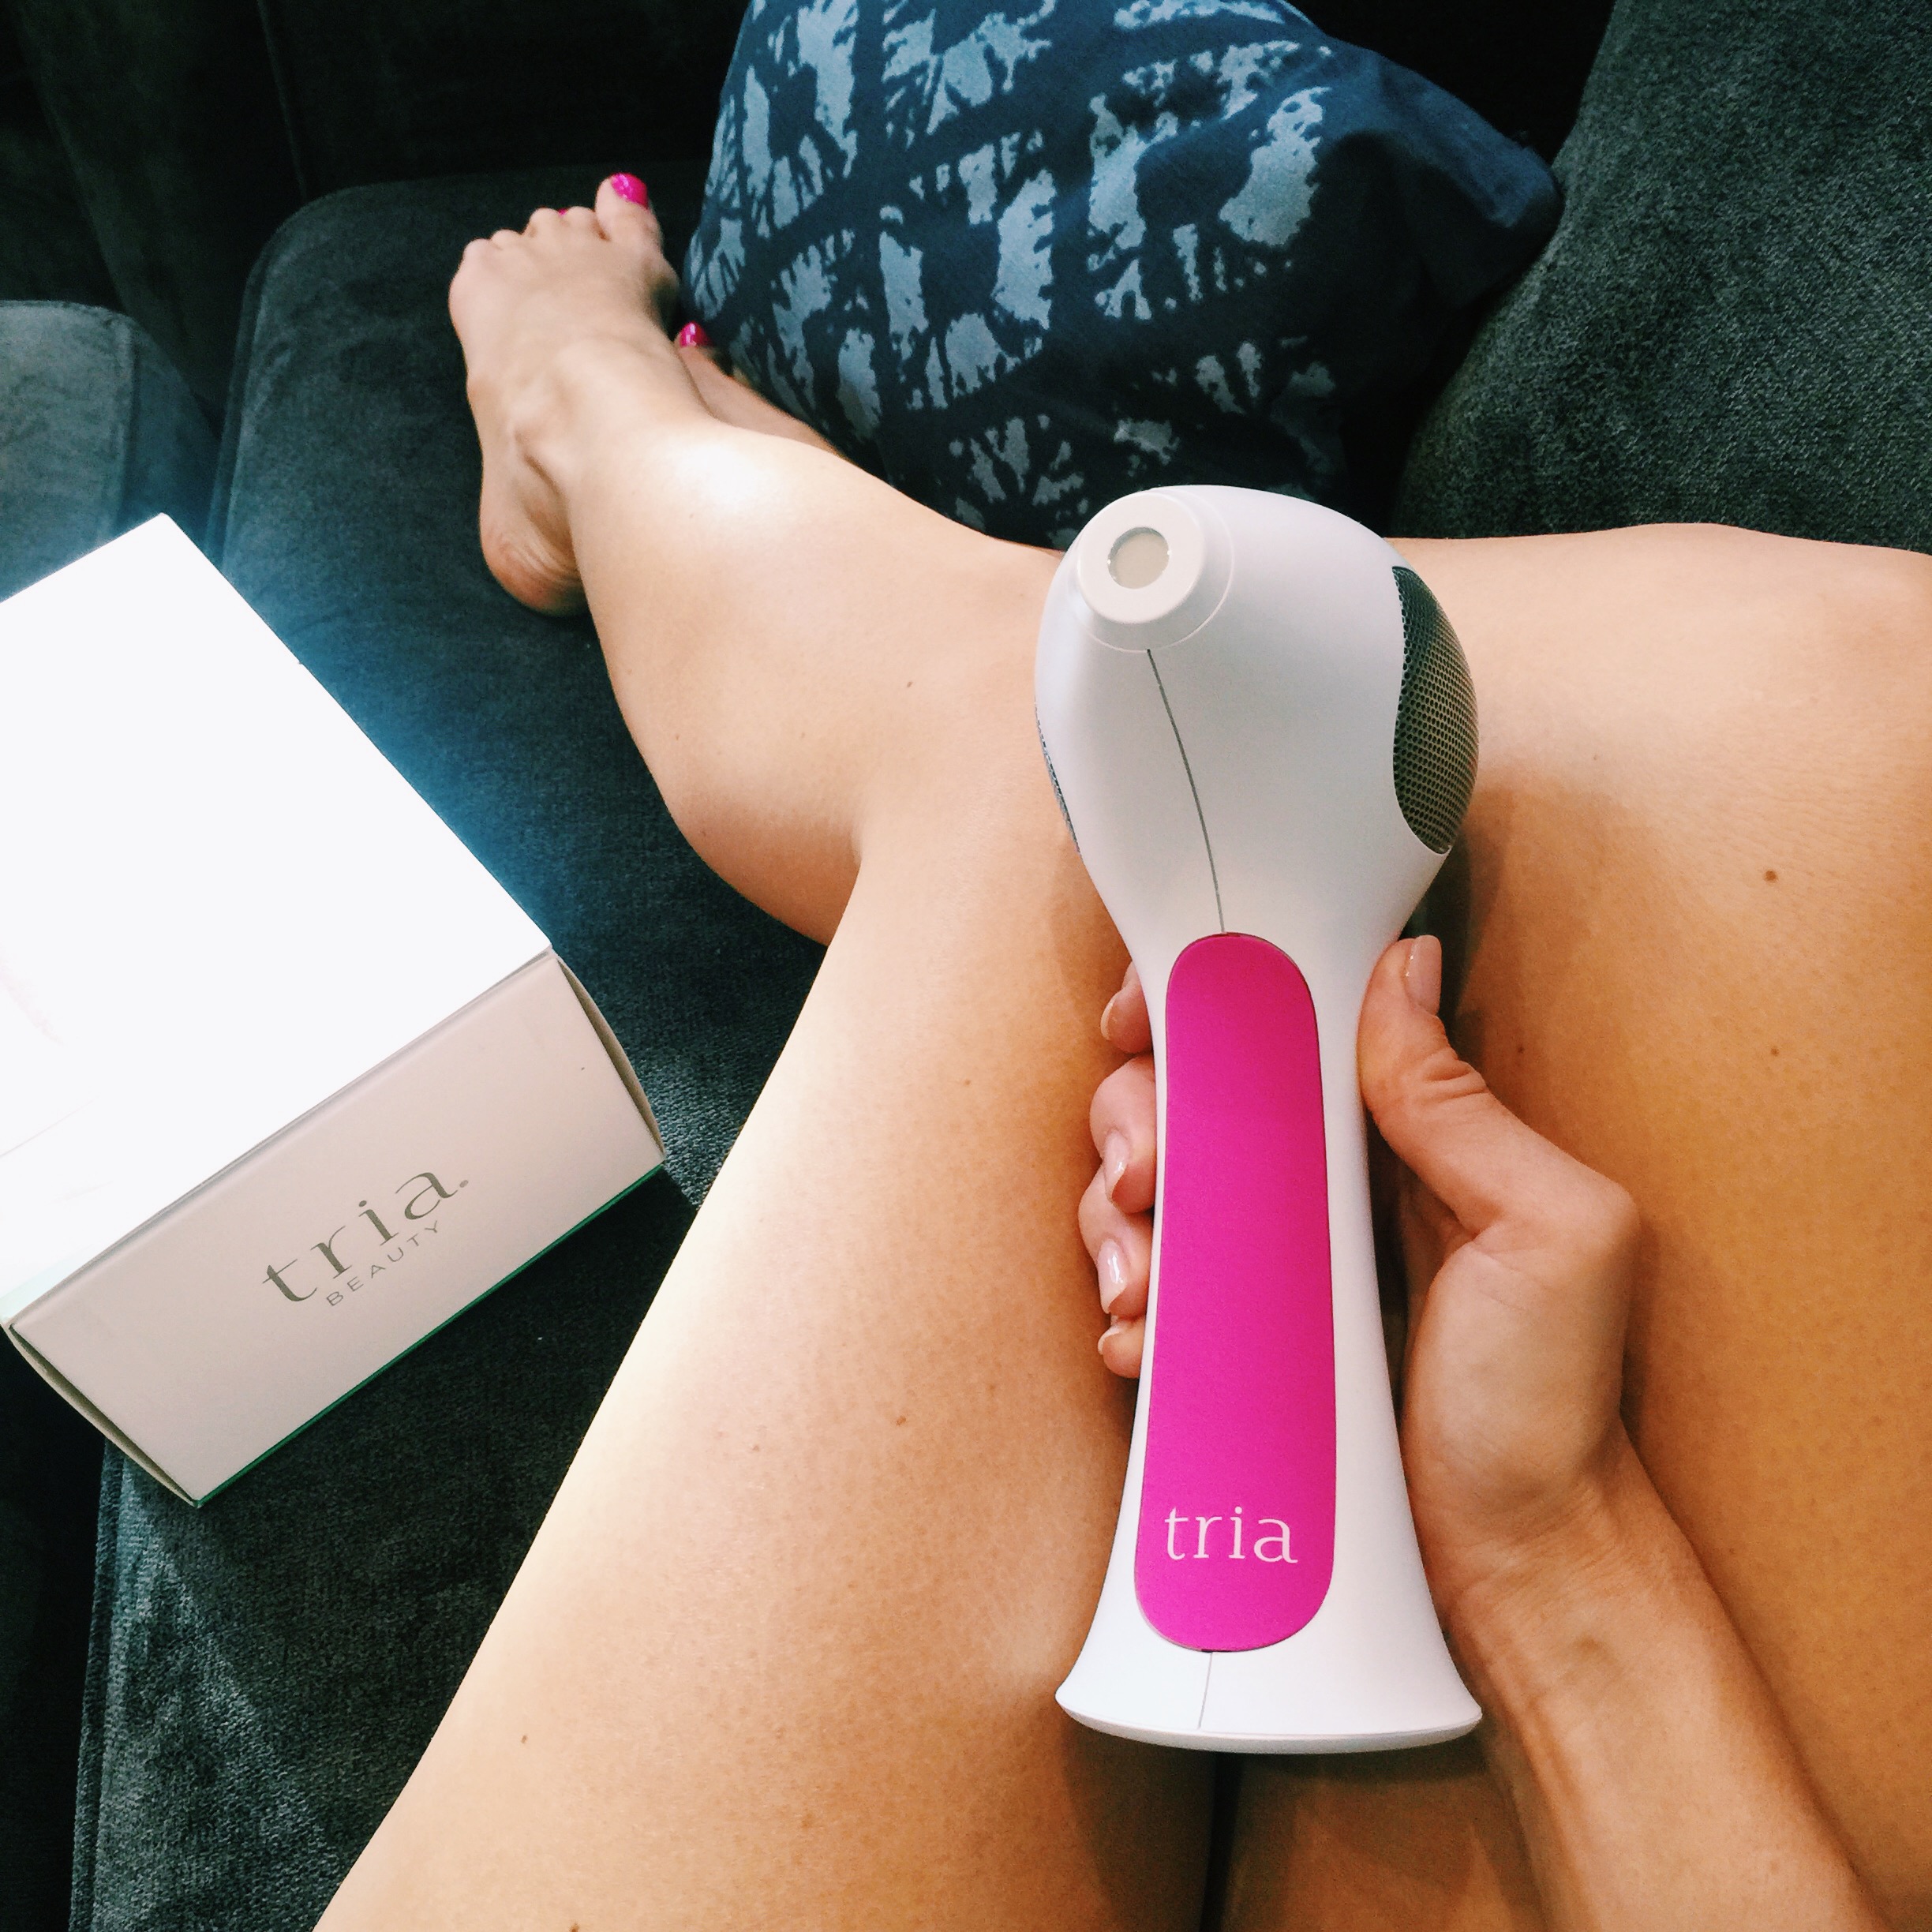 Tria Hair Removal Laser 4X Review